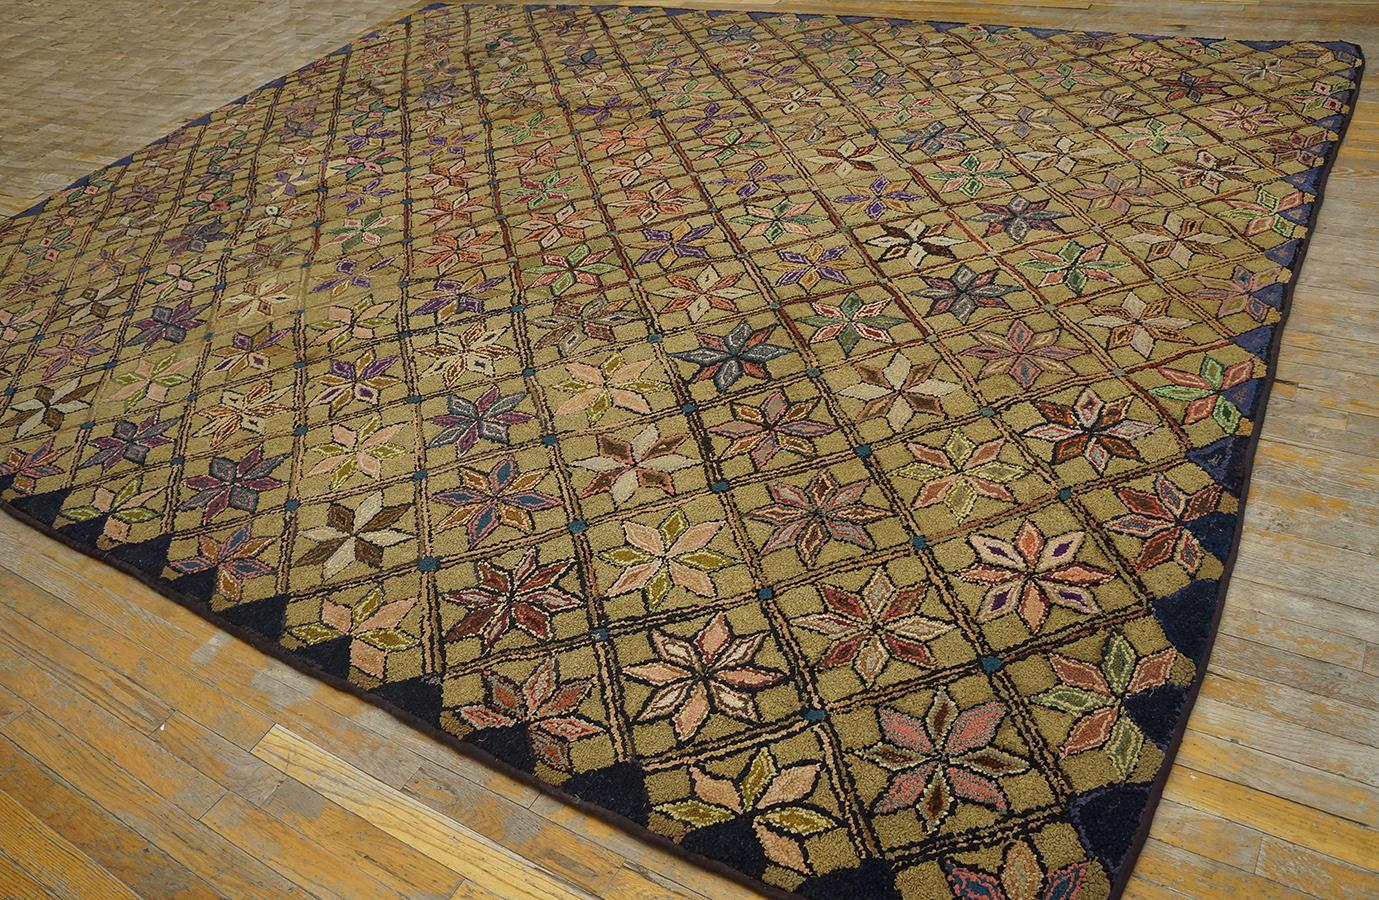 Hand-Woven Early 20th Century American Hooked Rug ( 10' x 12'2